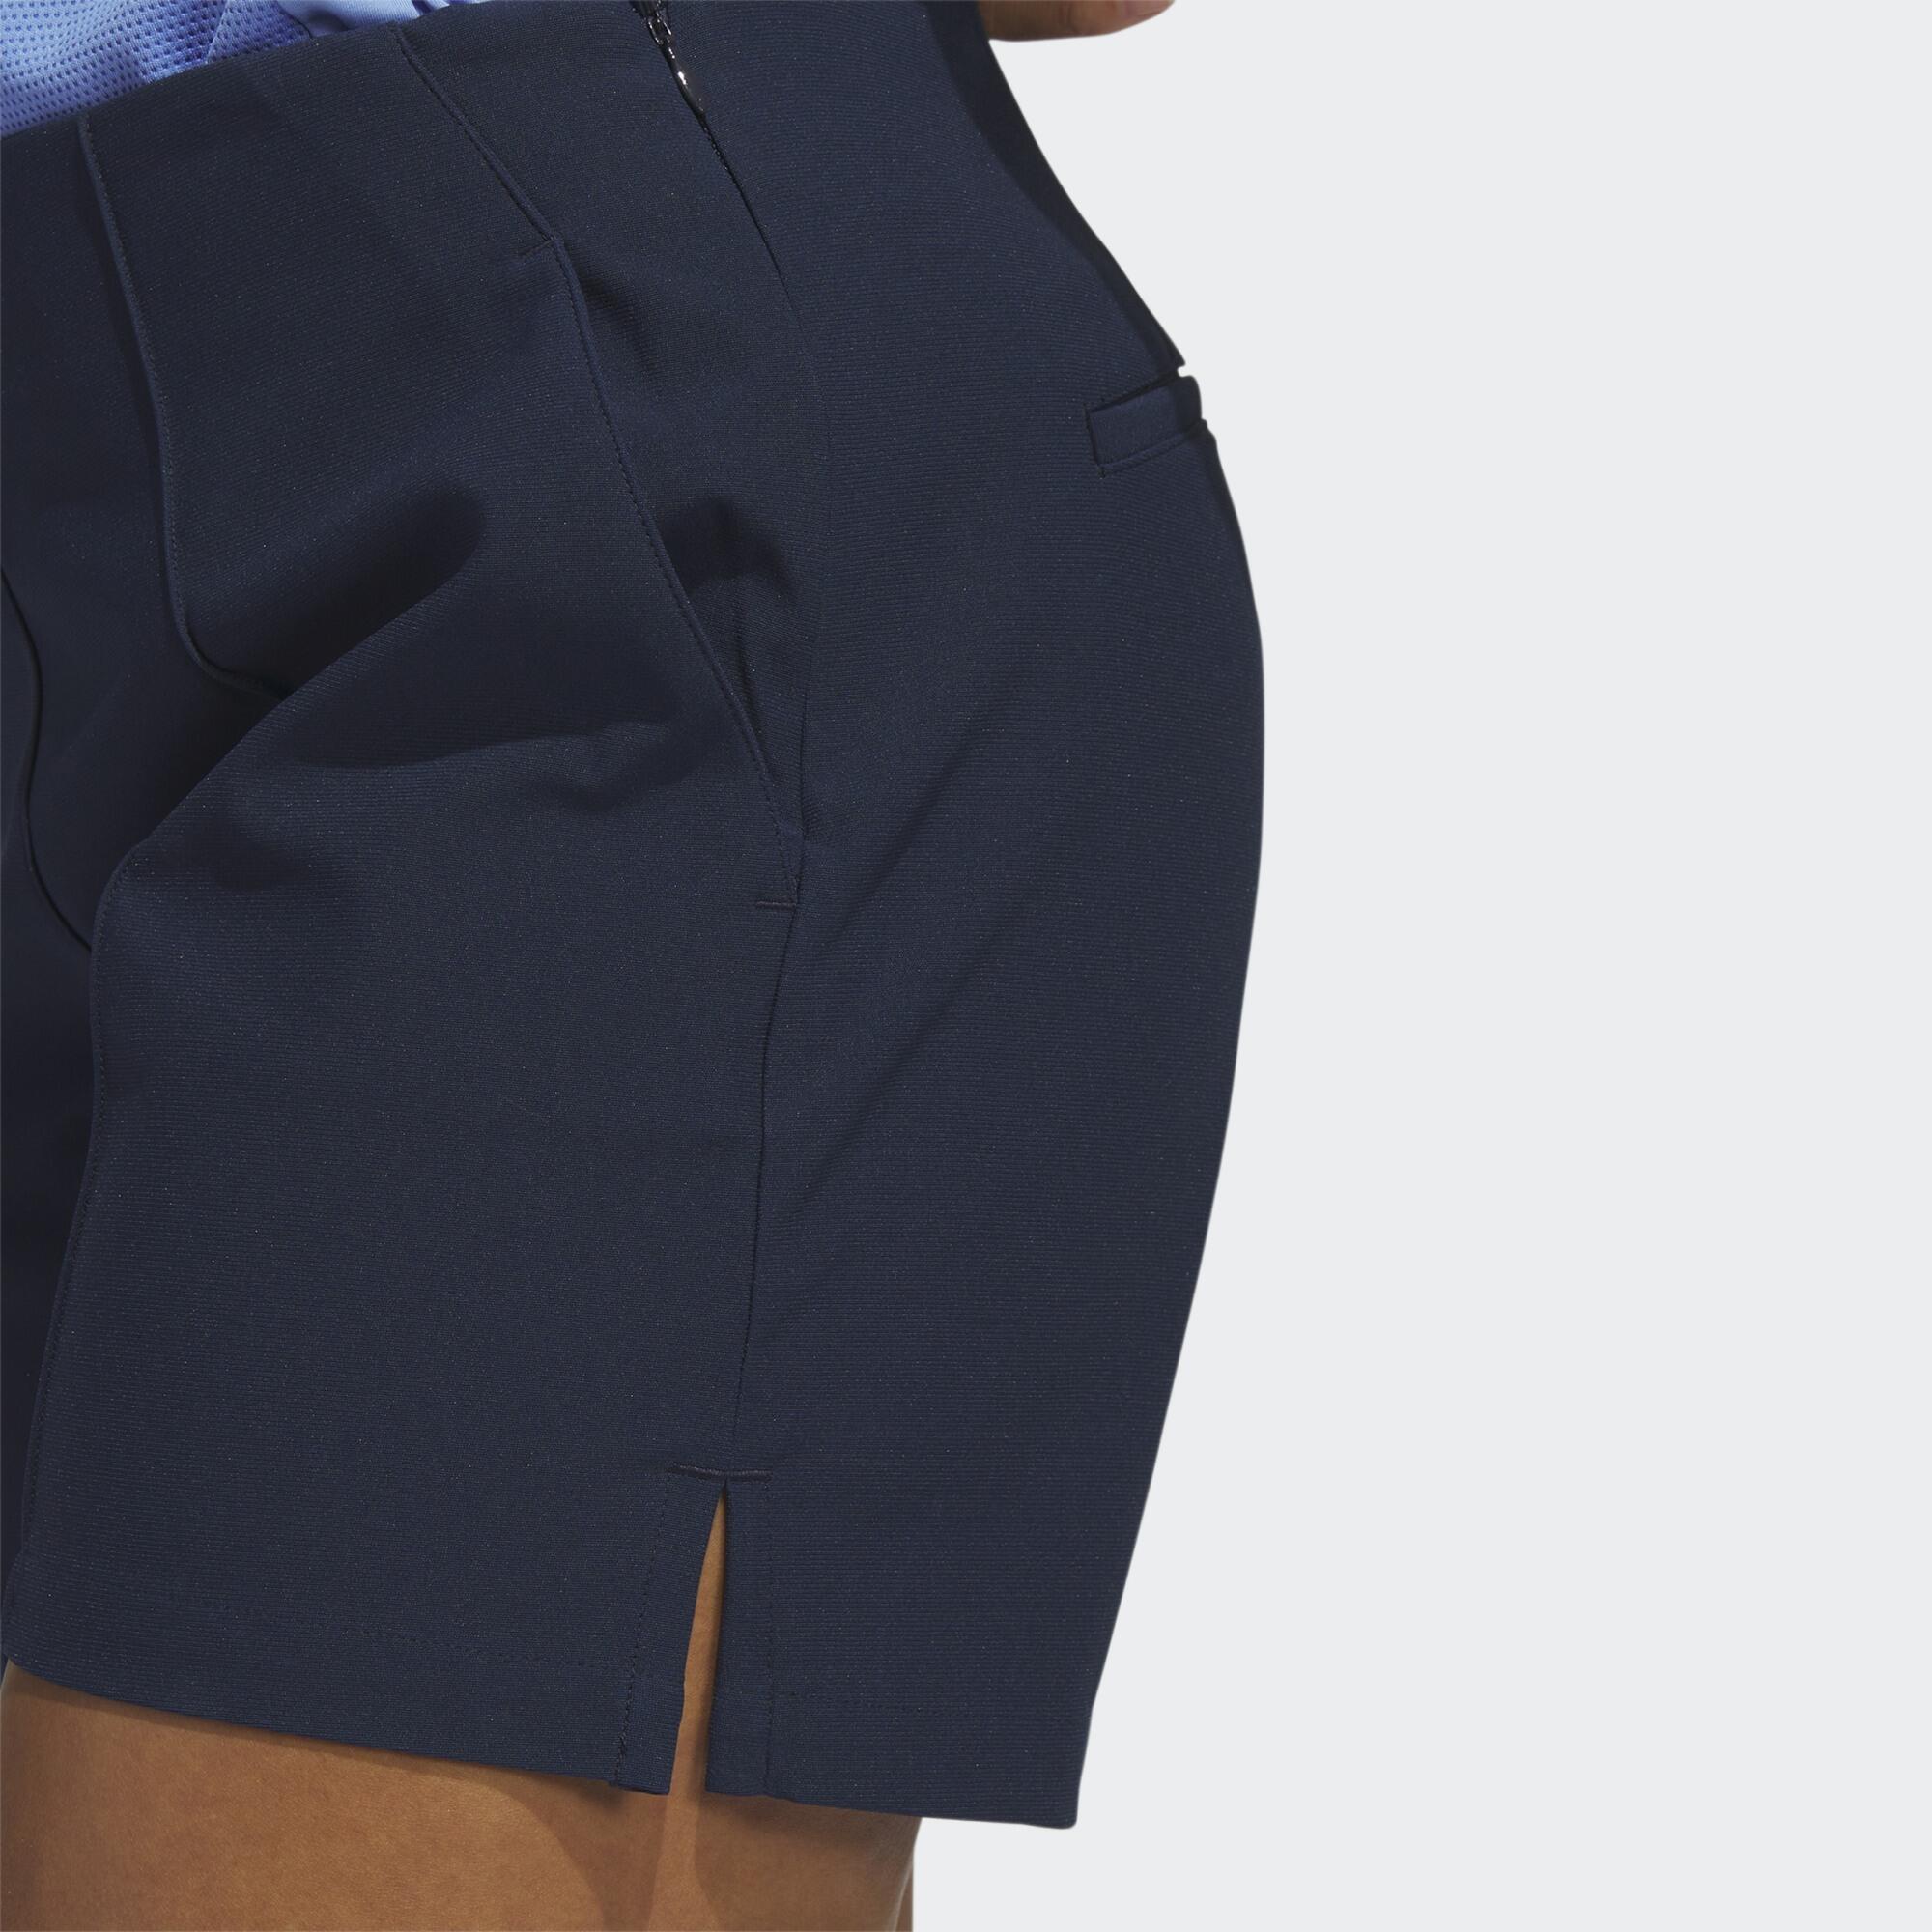 Pintuck 5-Inch Pull-On Golf Shorts 4/5